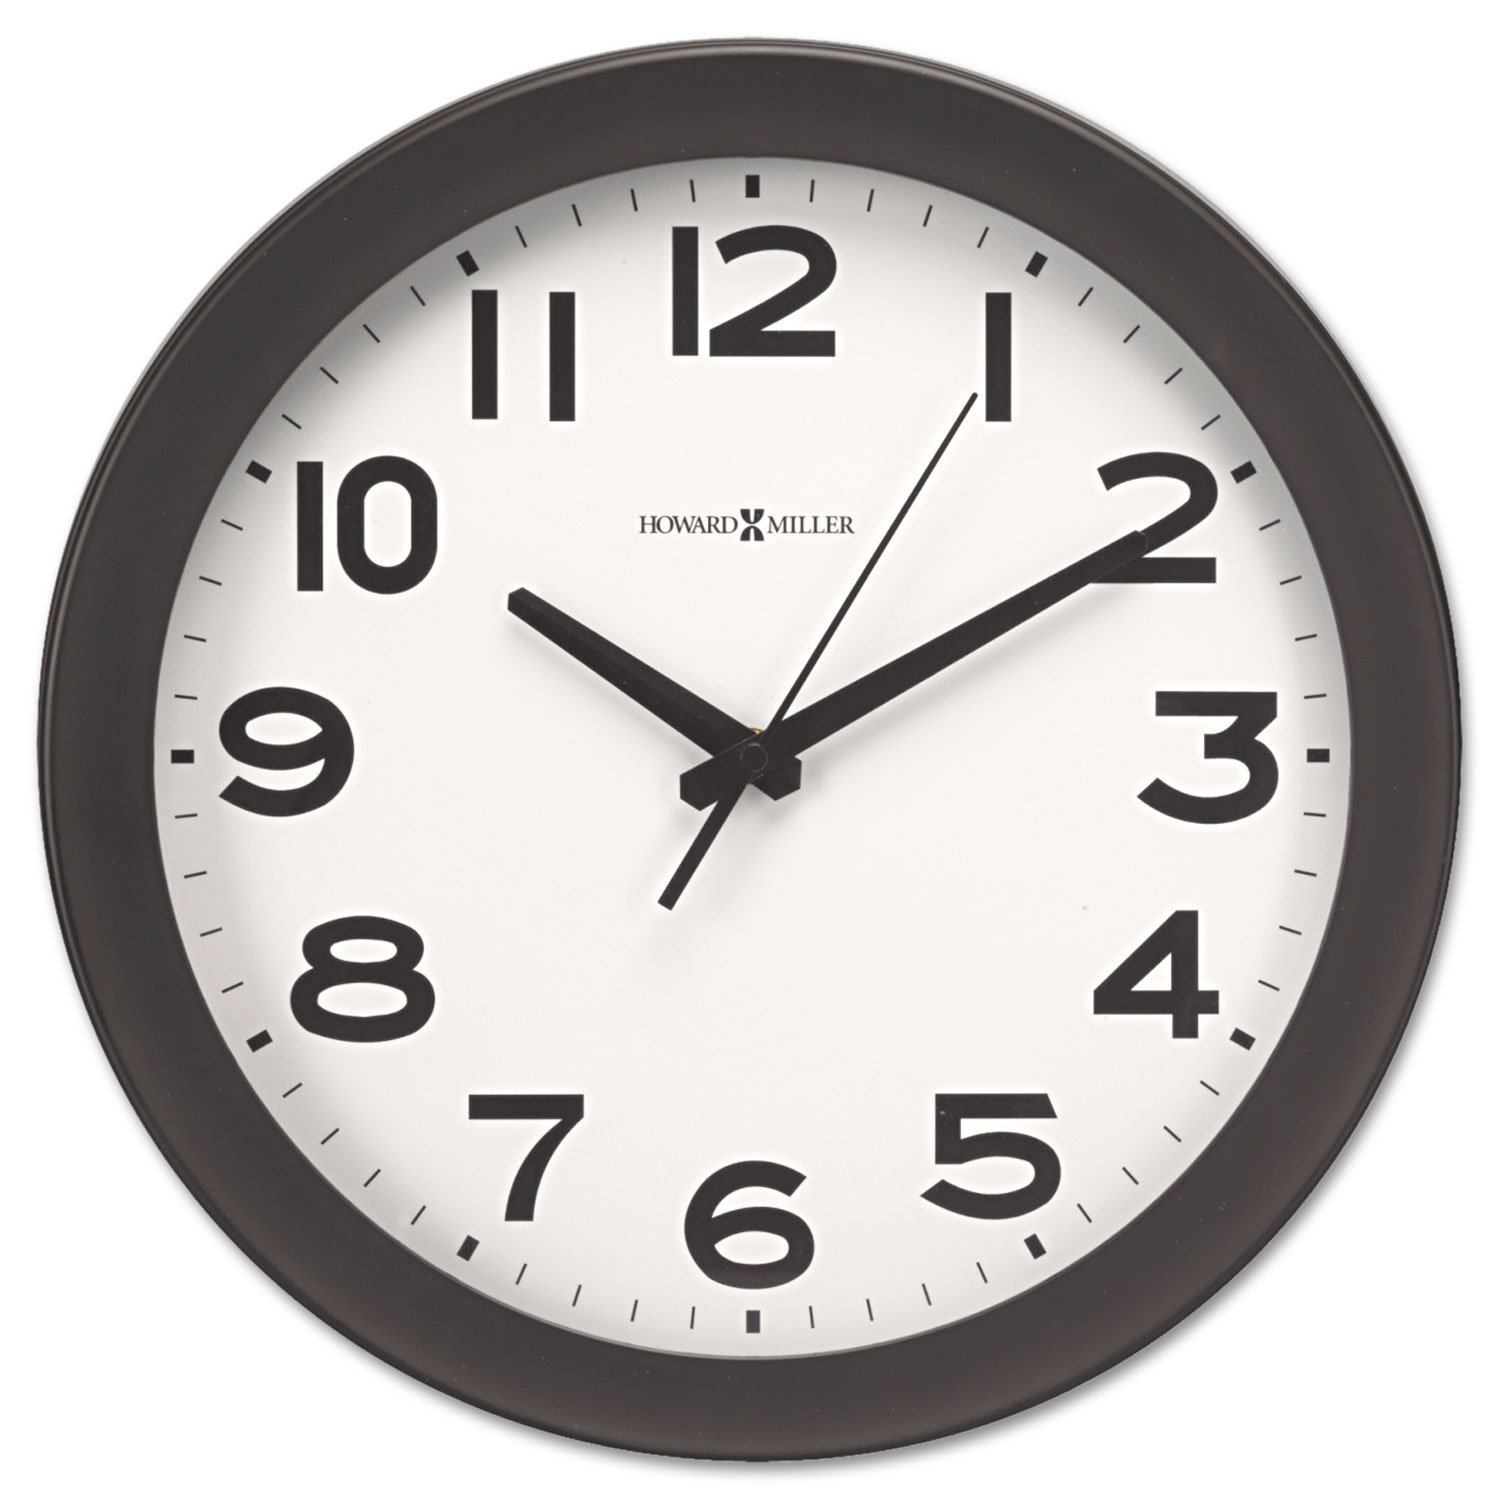 Kenwick Wall Clock, 13.5" Overall Diameter, Black Case, 1 AA (sold separately)